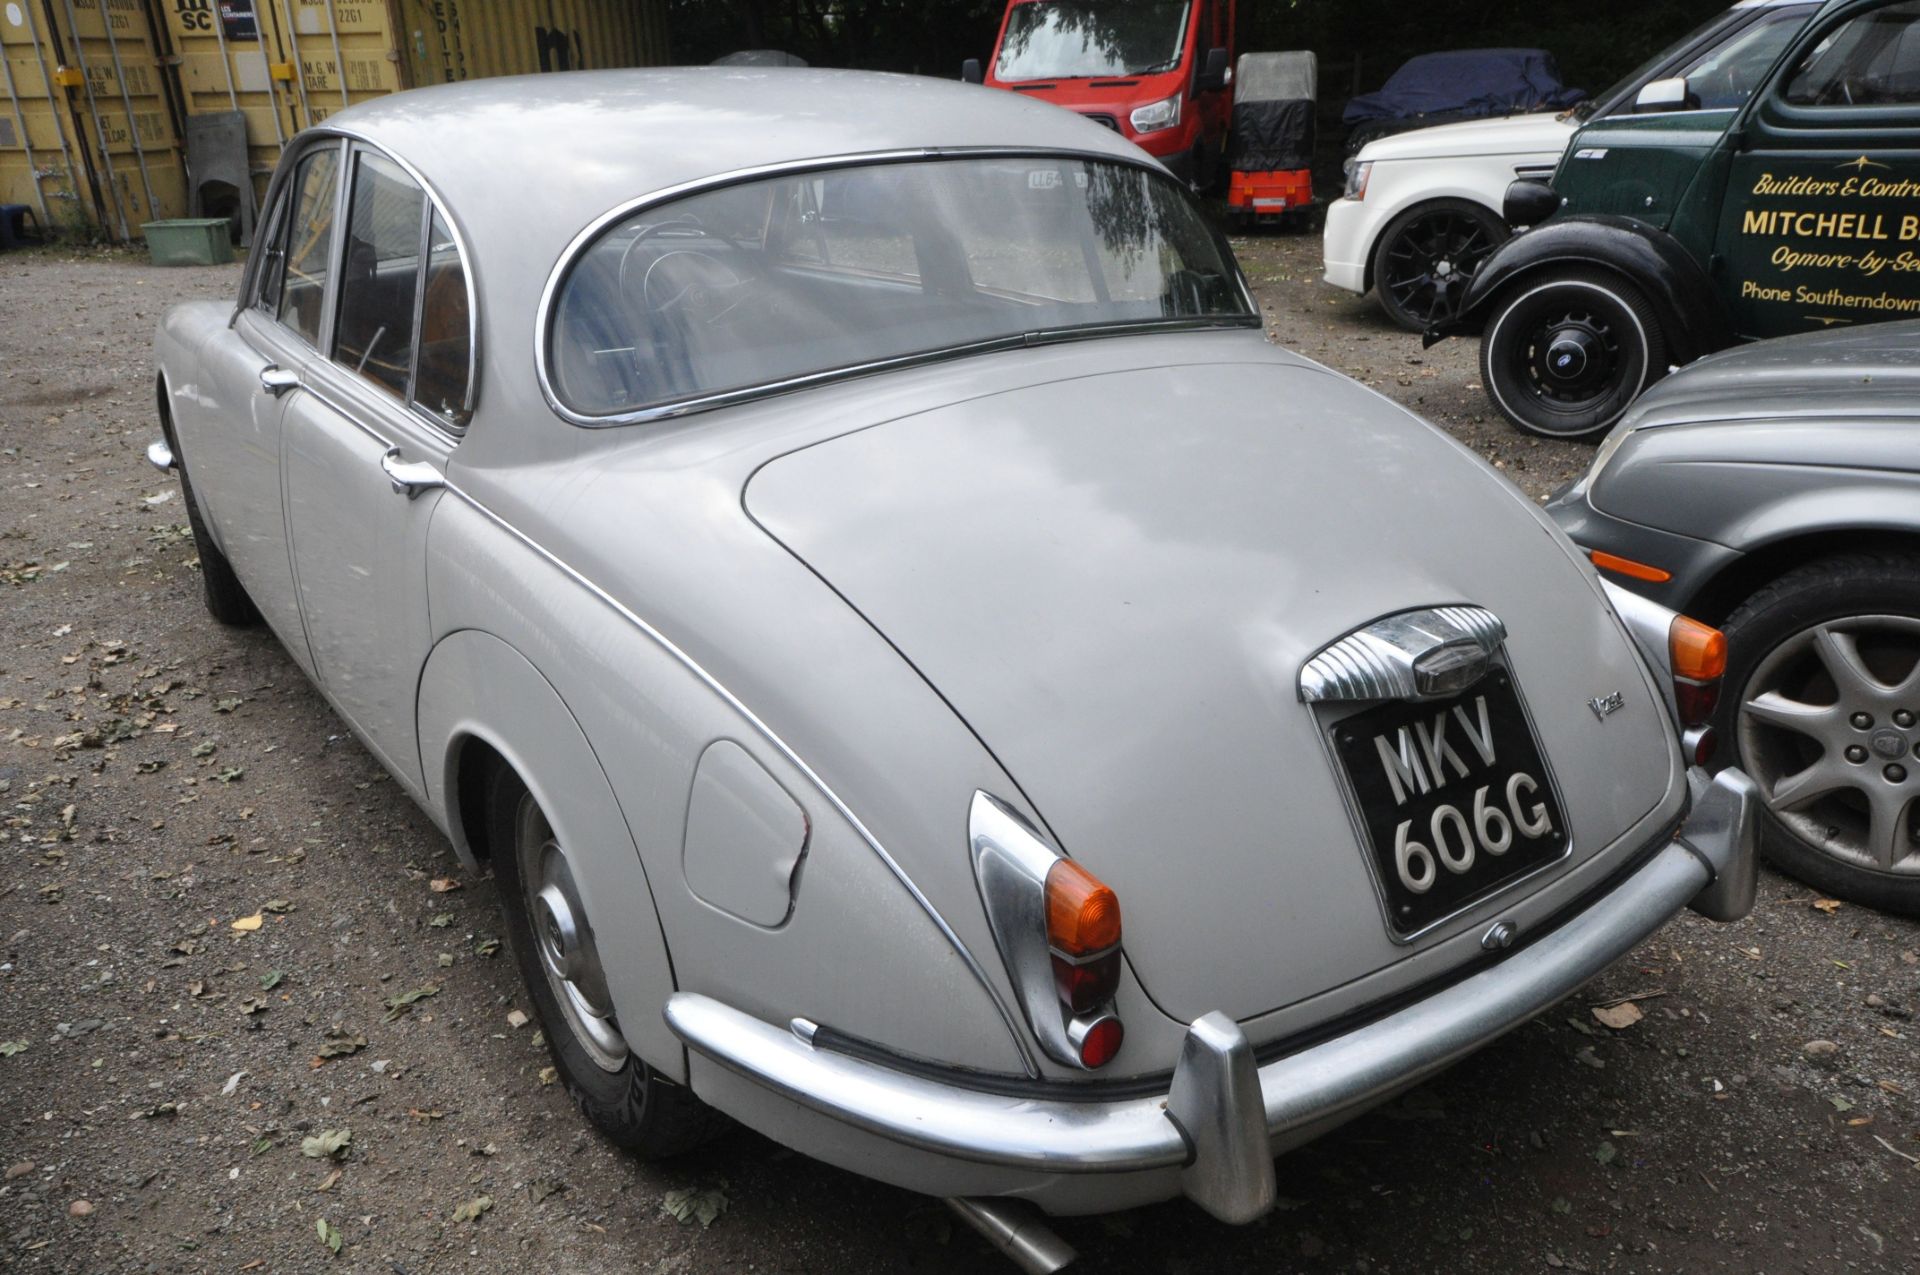 A 1968 DAIMLER V8 250 FOUR DOOR SALOON - MKV 606G - This vehicle was first registered in November - Image 5 of 20